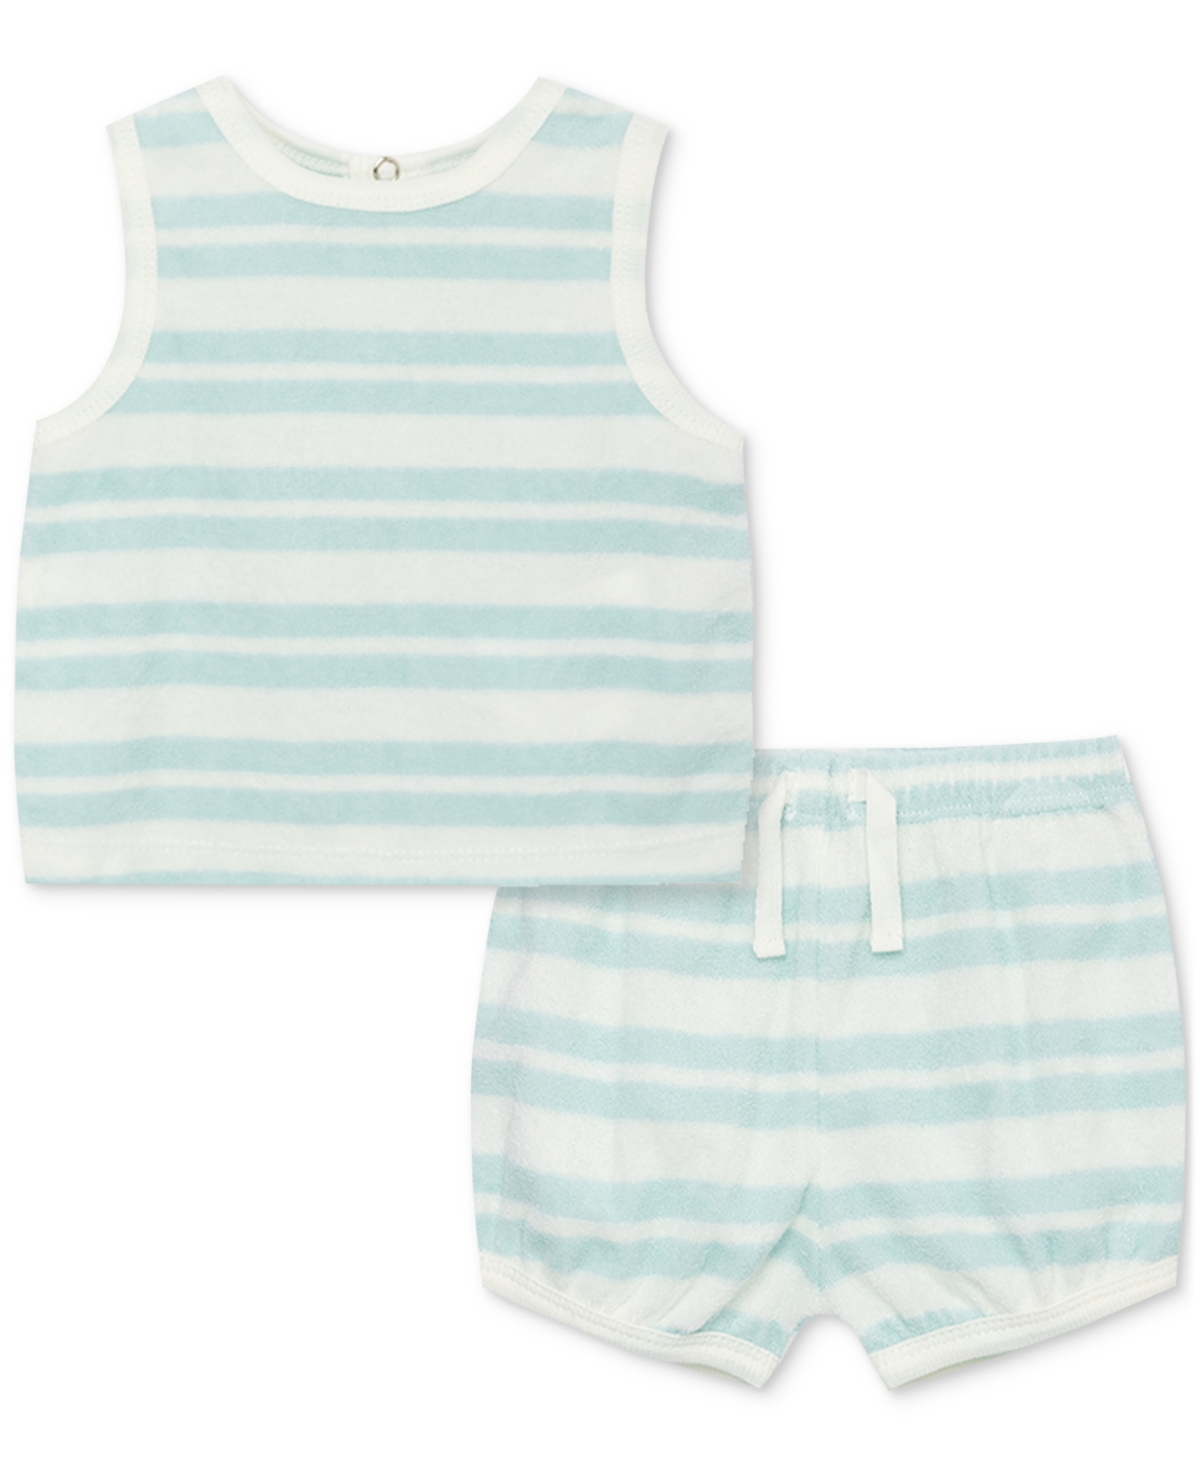 Focus Baby Boys Or Baby Girls Tank Top And Shorts, 2 Piece Set In Pastel Blue